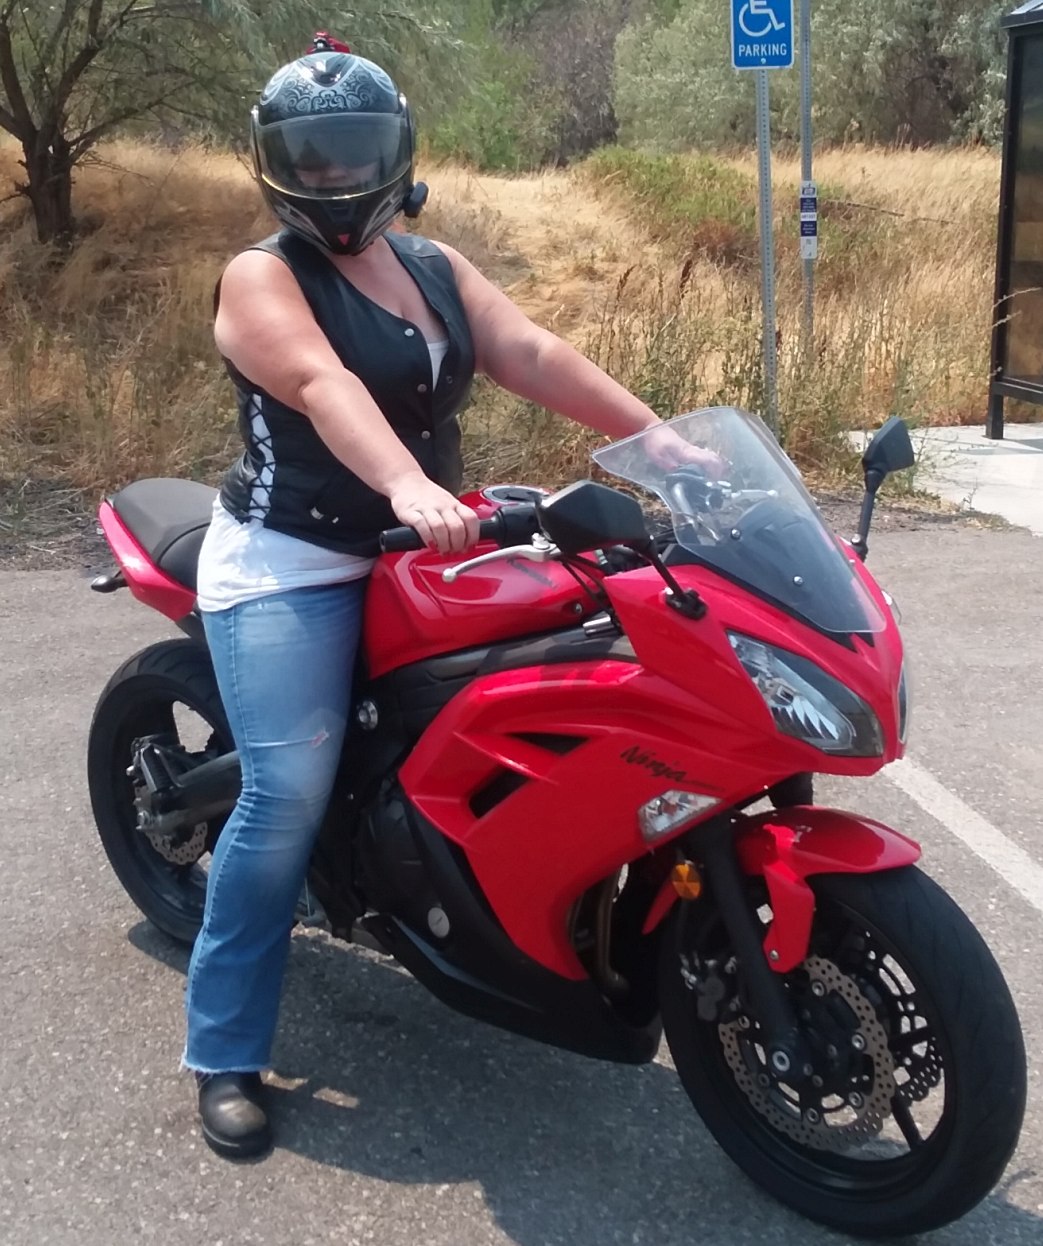 A helmeted woman sits astride a red Kawasaki Ninja 650. Her arms are extended to hold the controls of the bike, and her feet are planted firmly on the ground. She wears black boots, blue jeans, a white tank top and a black leather vest. The vest is partially unsnapped at the neckline to show the white top beneath. In the background, dry grass and scattered trees and a public bus stop.